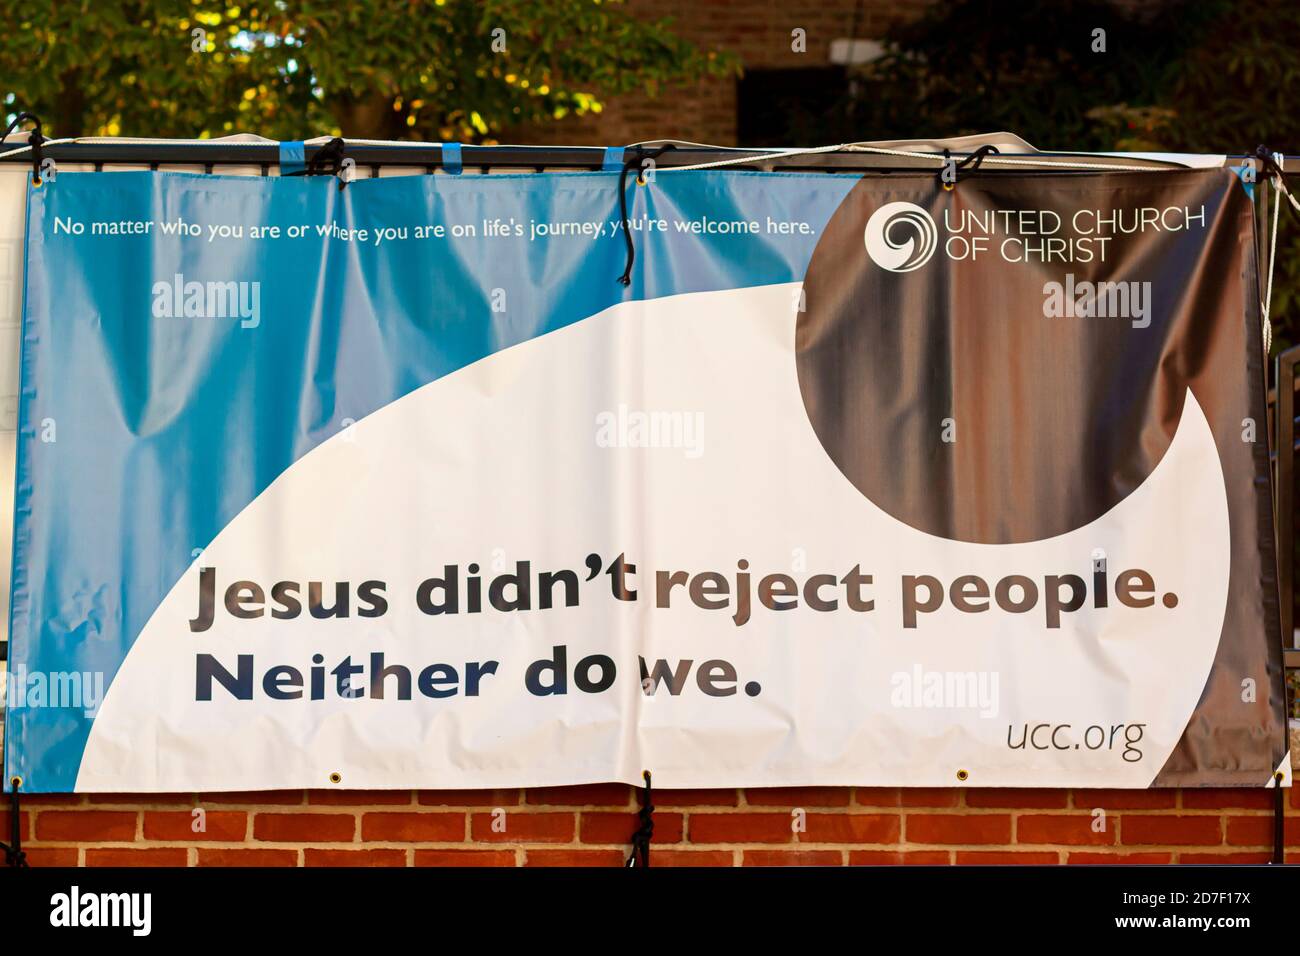 Frederick, MD, USA 10/14/2020: An inclusive and welcoming message from United Church of Christ that says everyone no matter who is welcome in their co Stock Photo